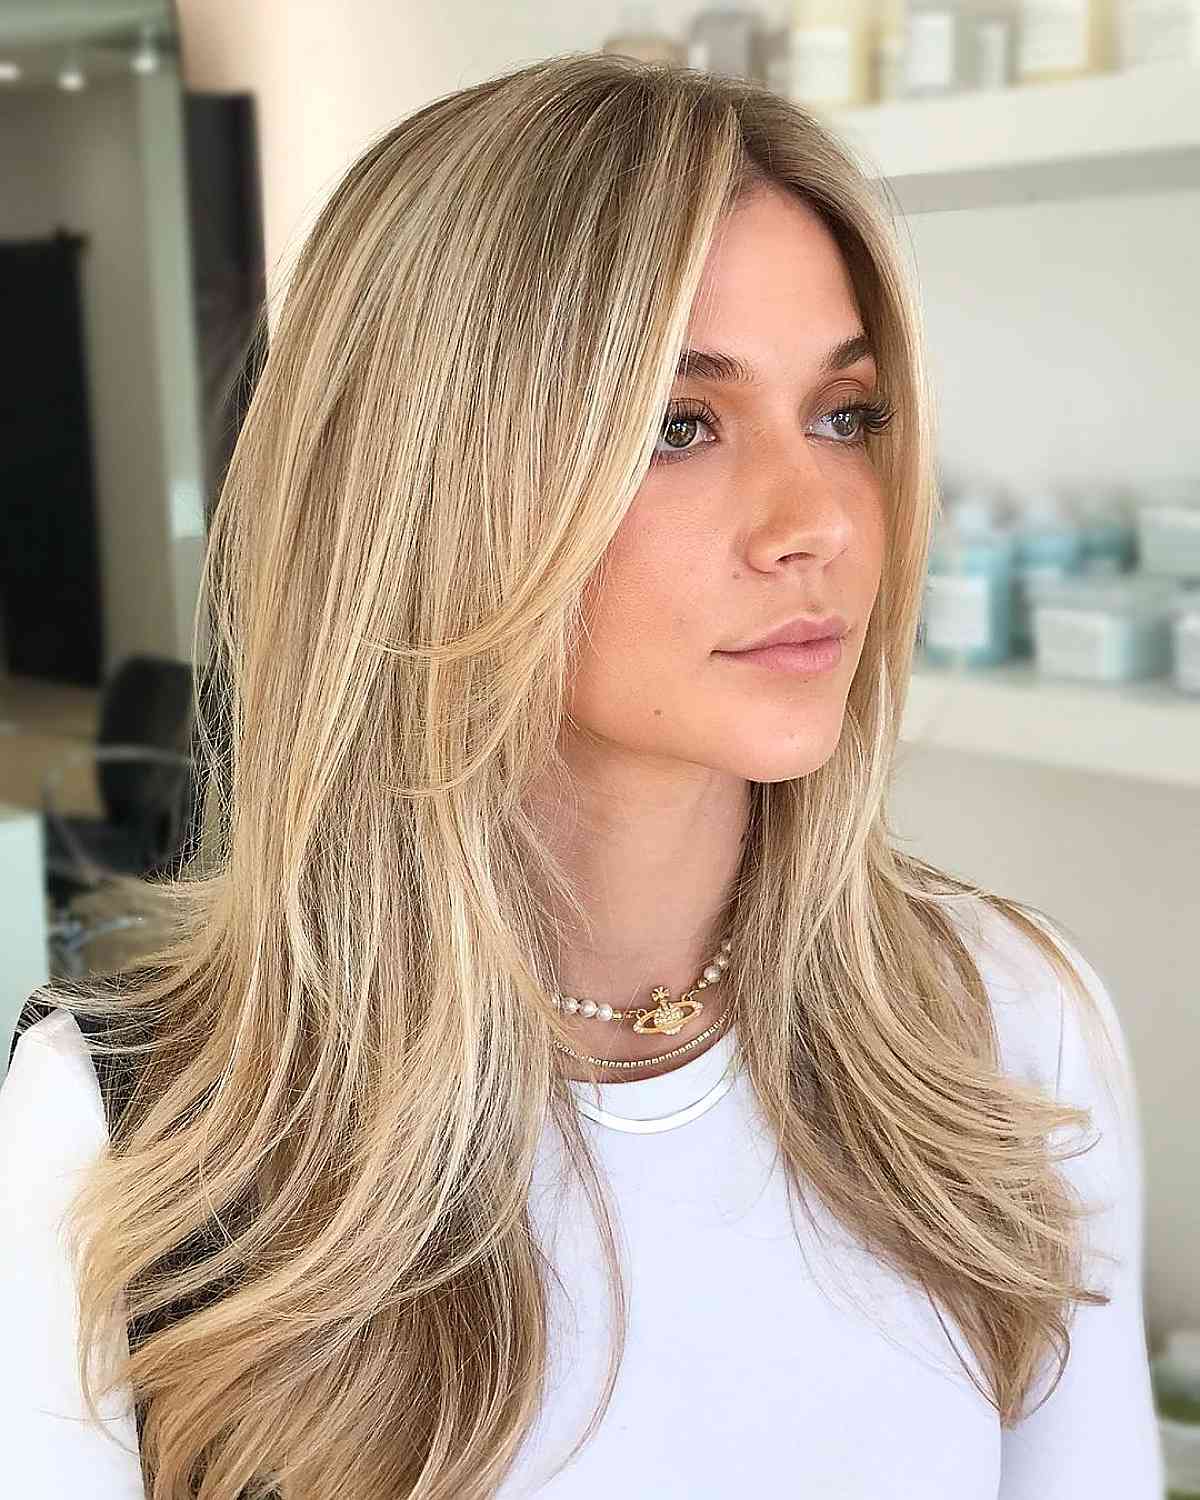 Short Layers on Long Hair: 13 Examples of This Hot Trend